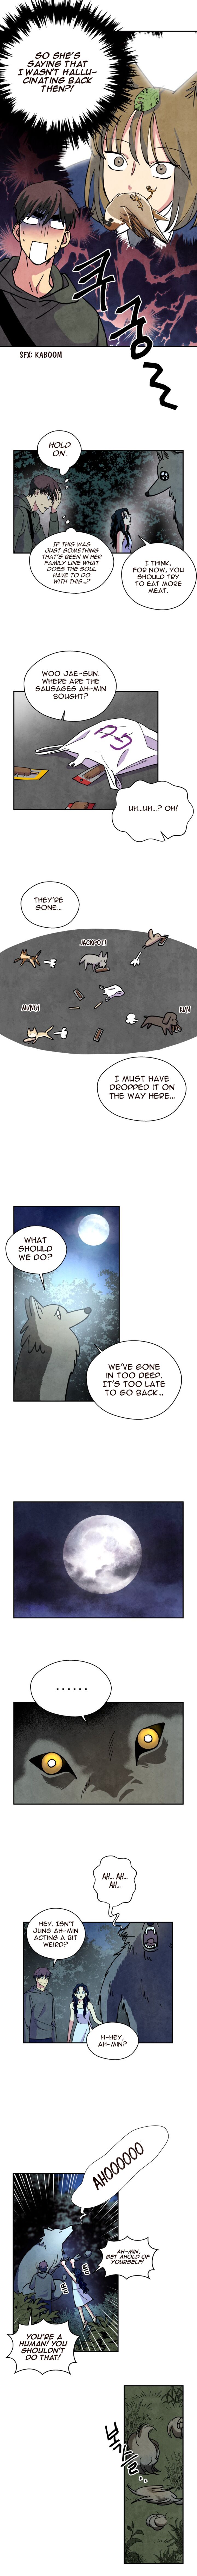 The Little Red Riding Hood Chapter 23 Page 6